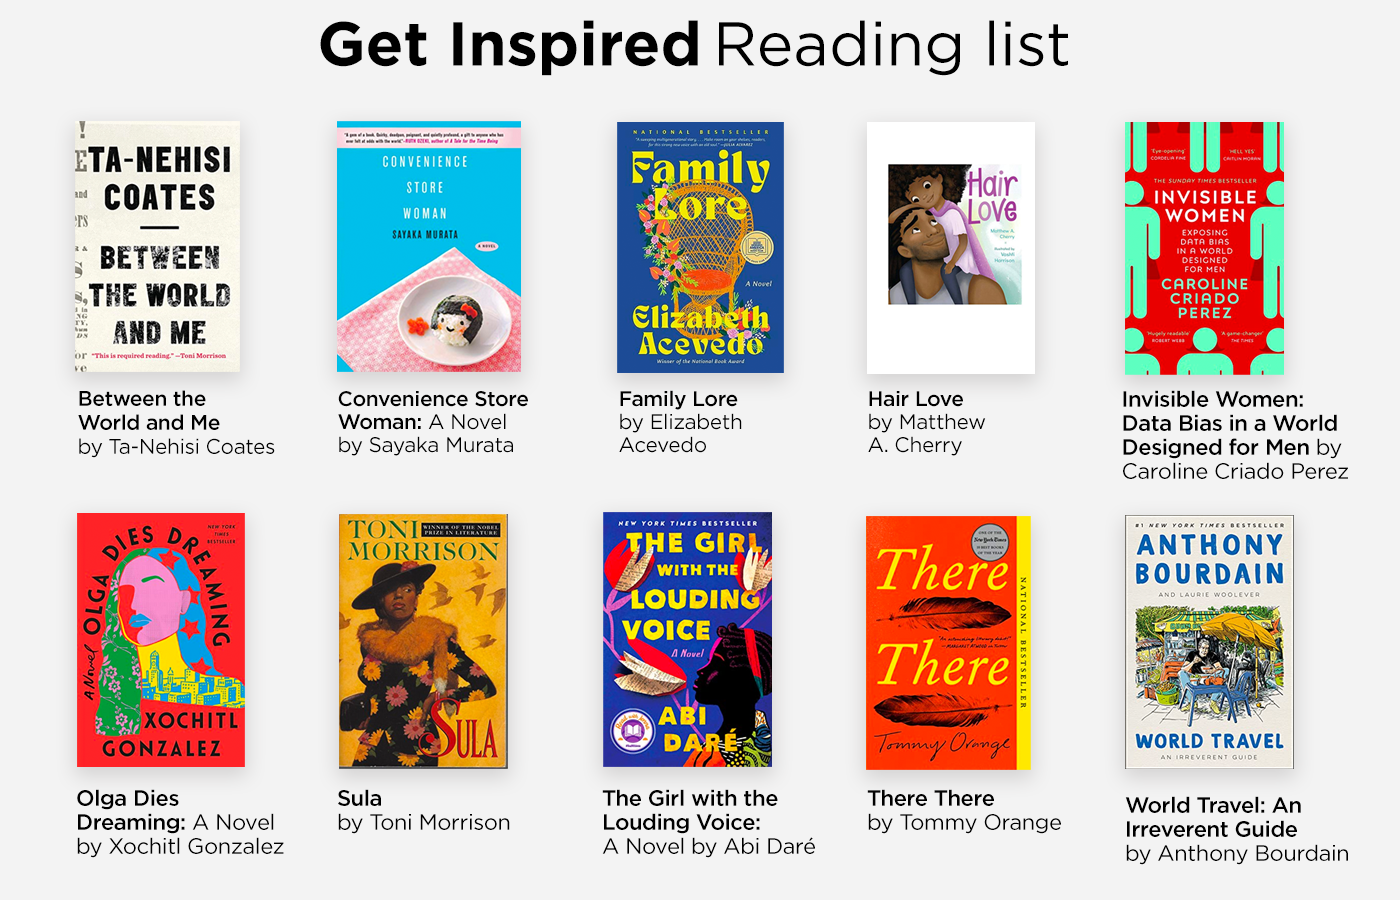 A graphic says "Get Inspired Reading List" and shows a variety of colorful book covers.